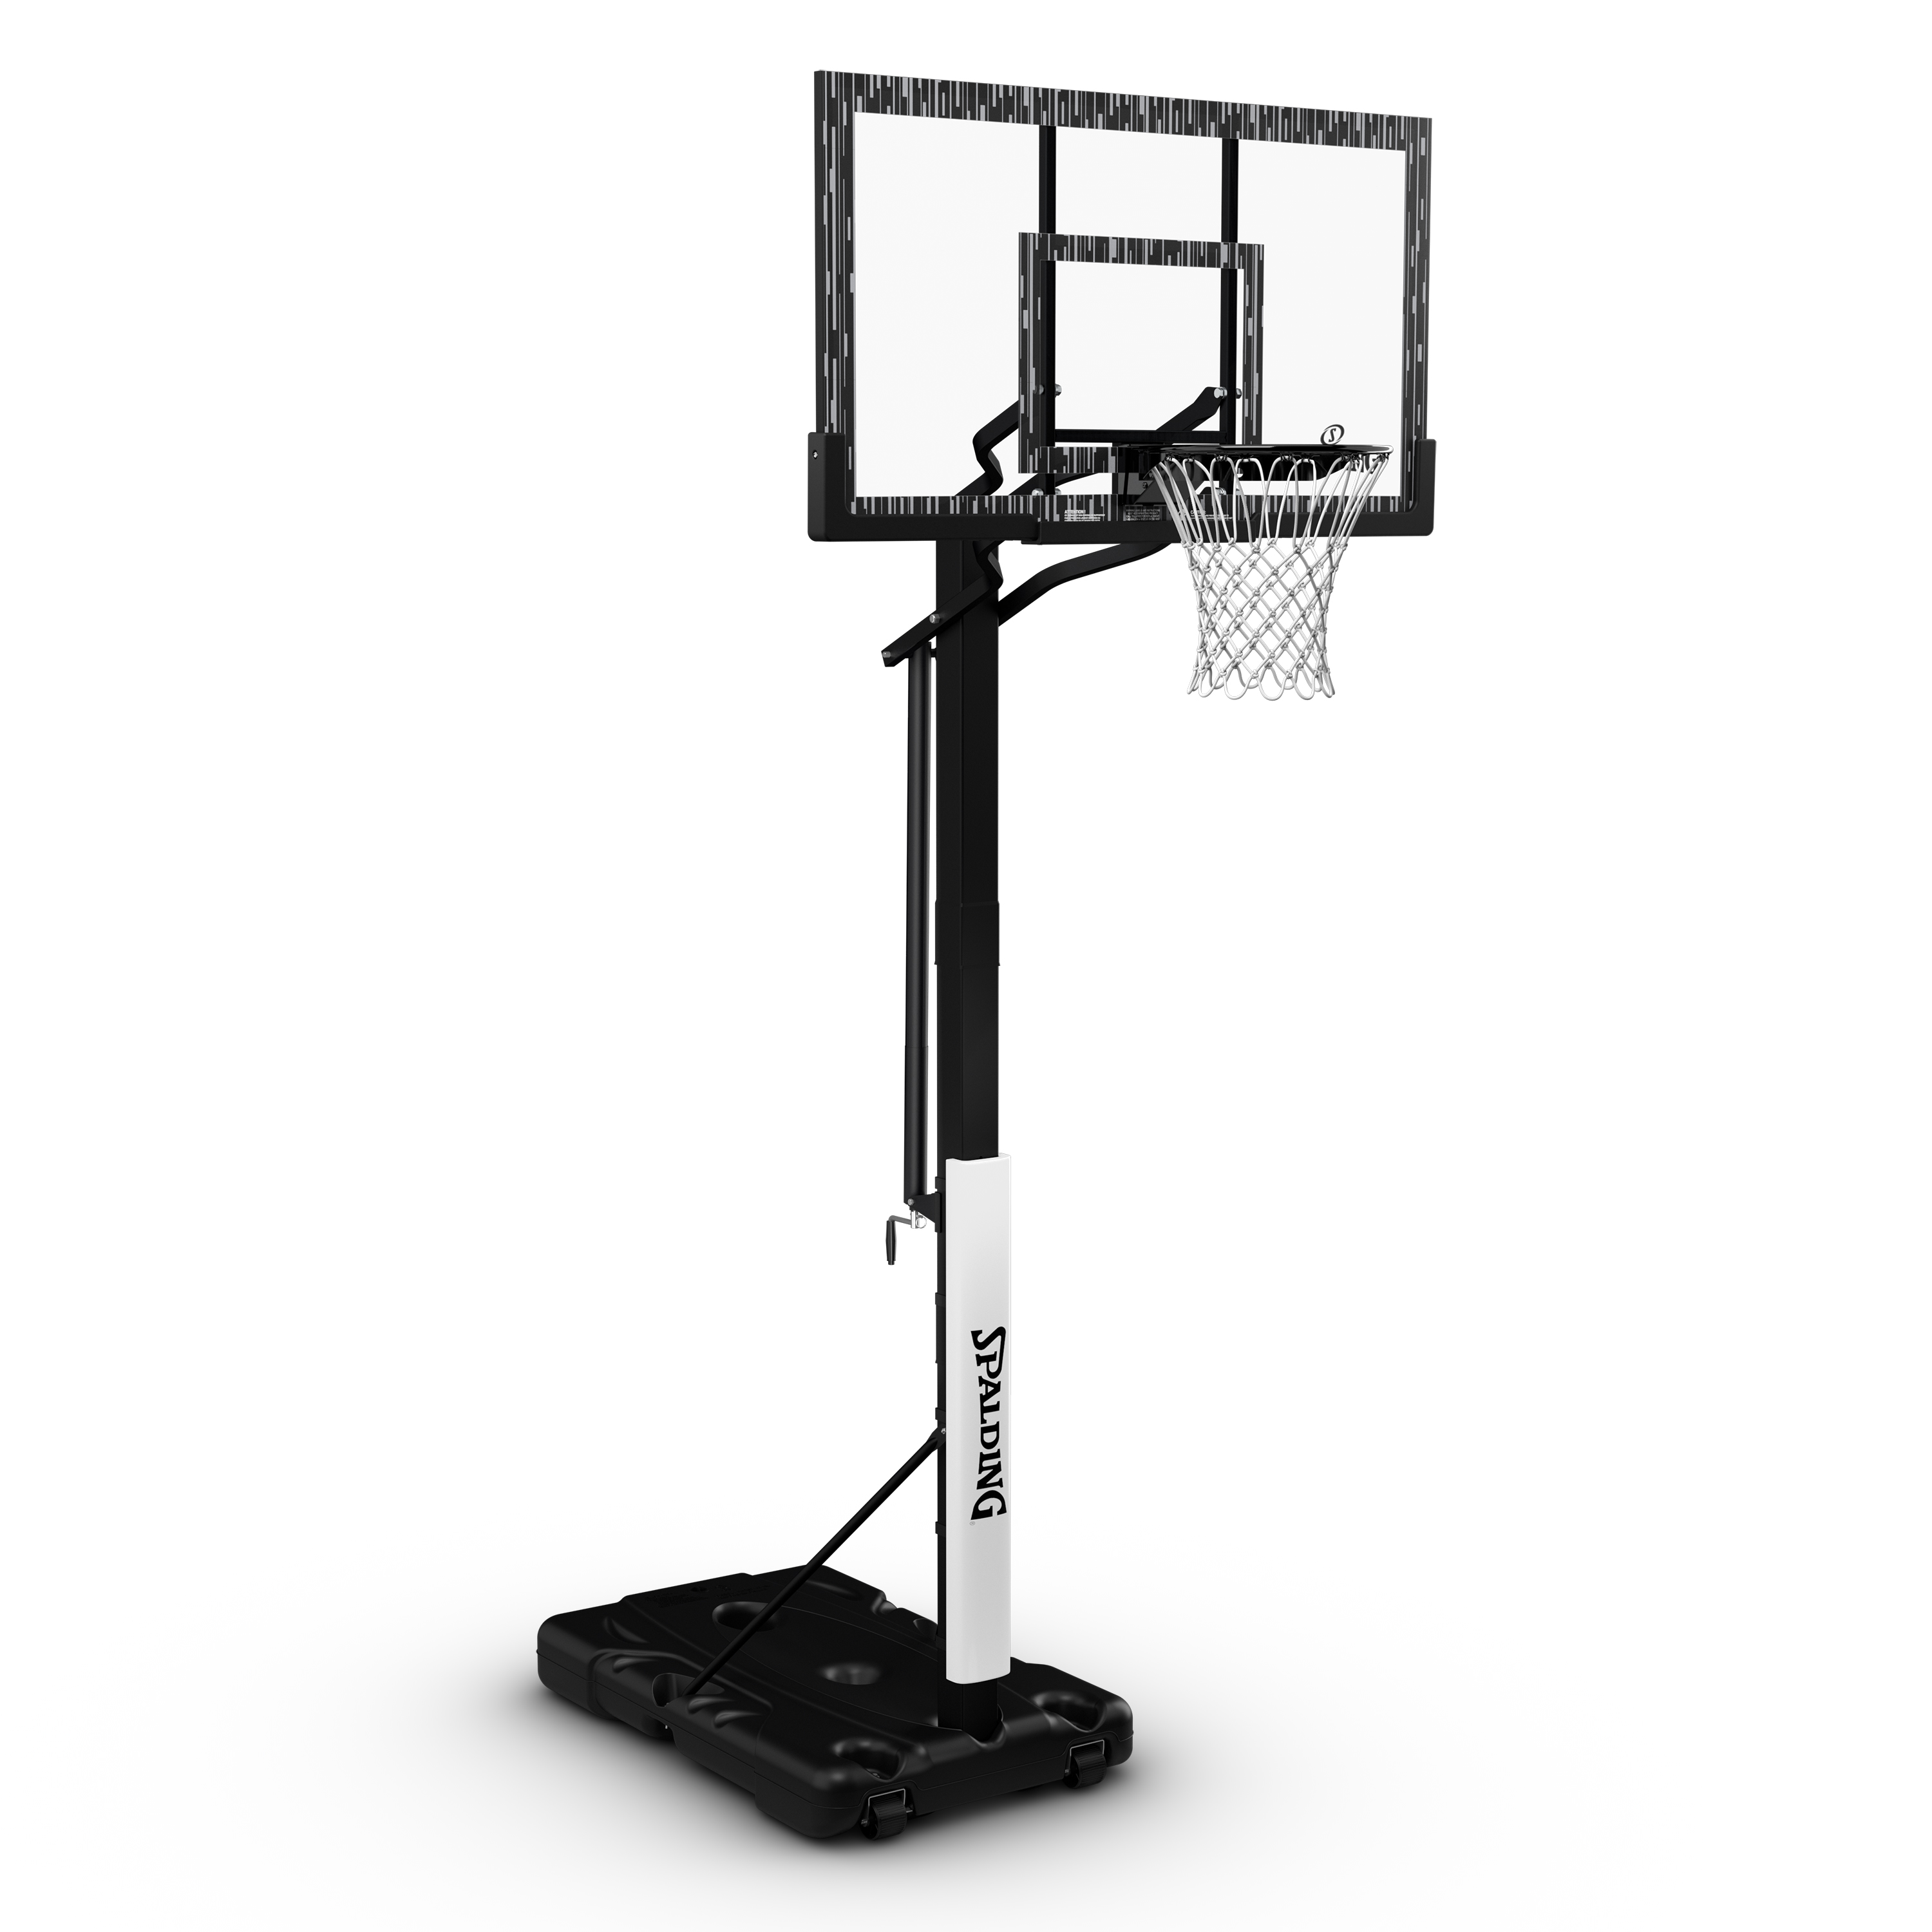 Spalding 60 inch Acrylic Screw Jack Portable Basketball Hoop System - image 1 of 11